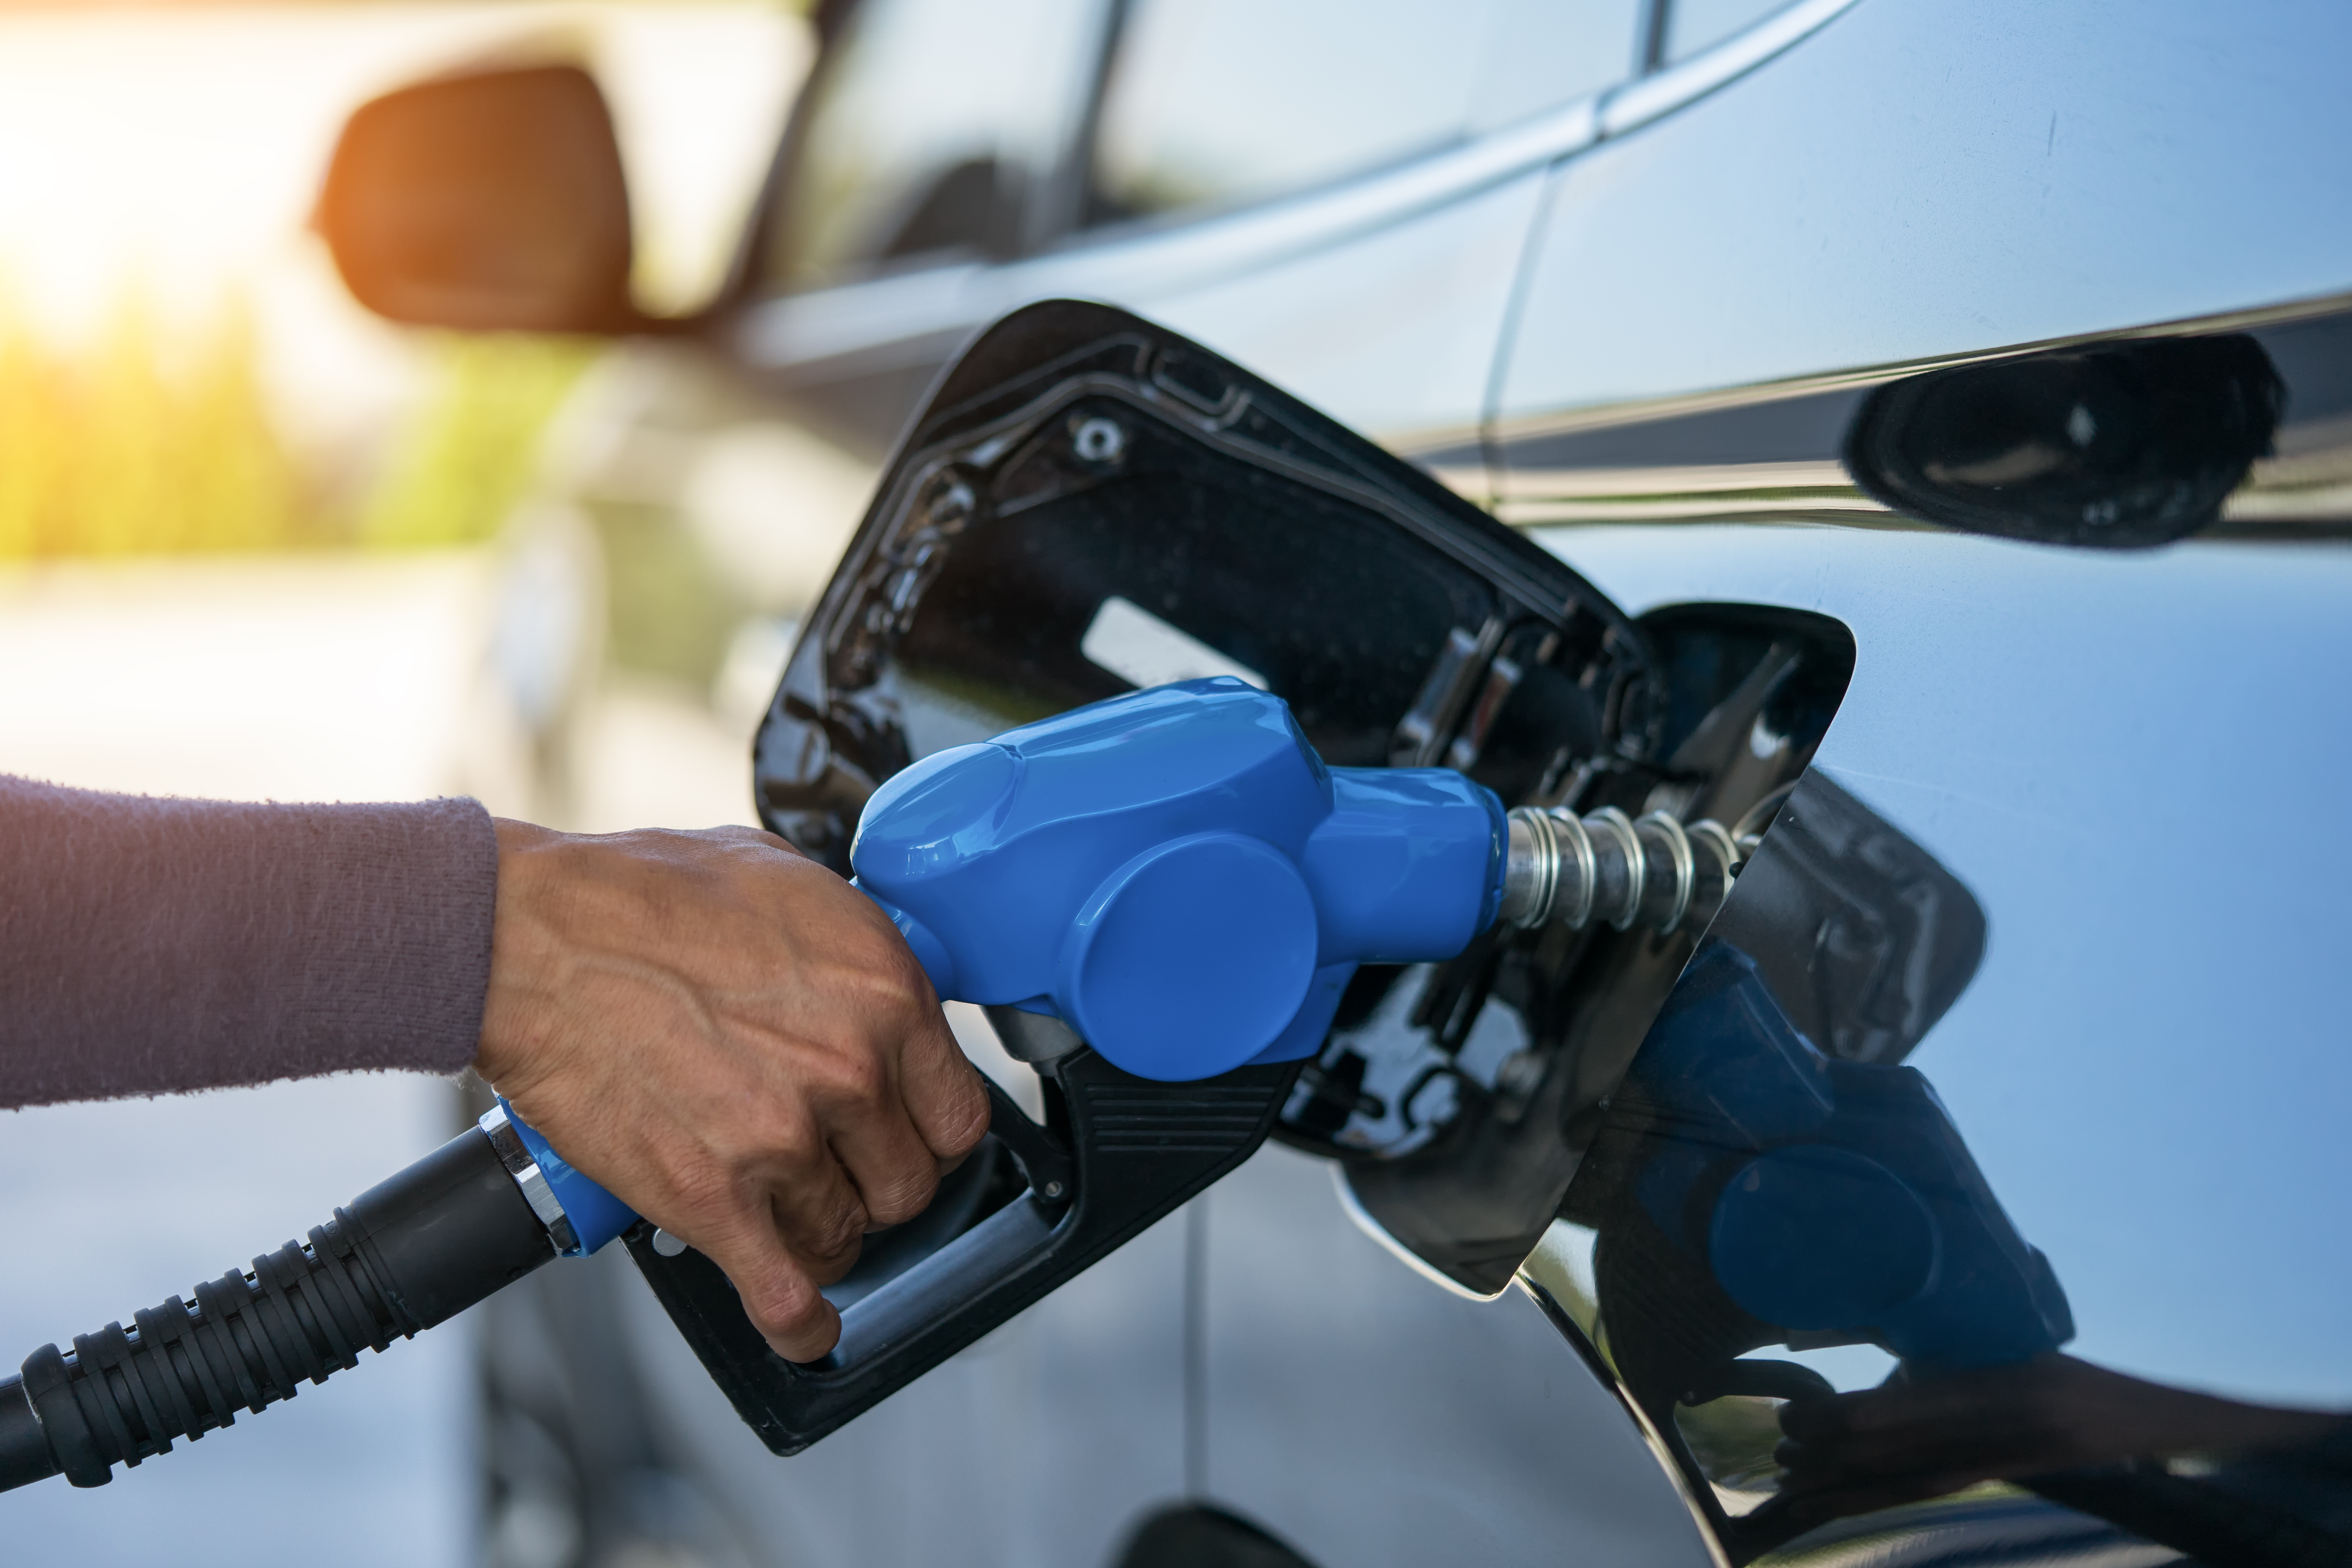 It’s (mostly) OK to pass on Premium gasoline